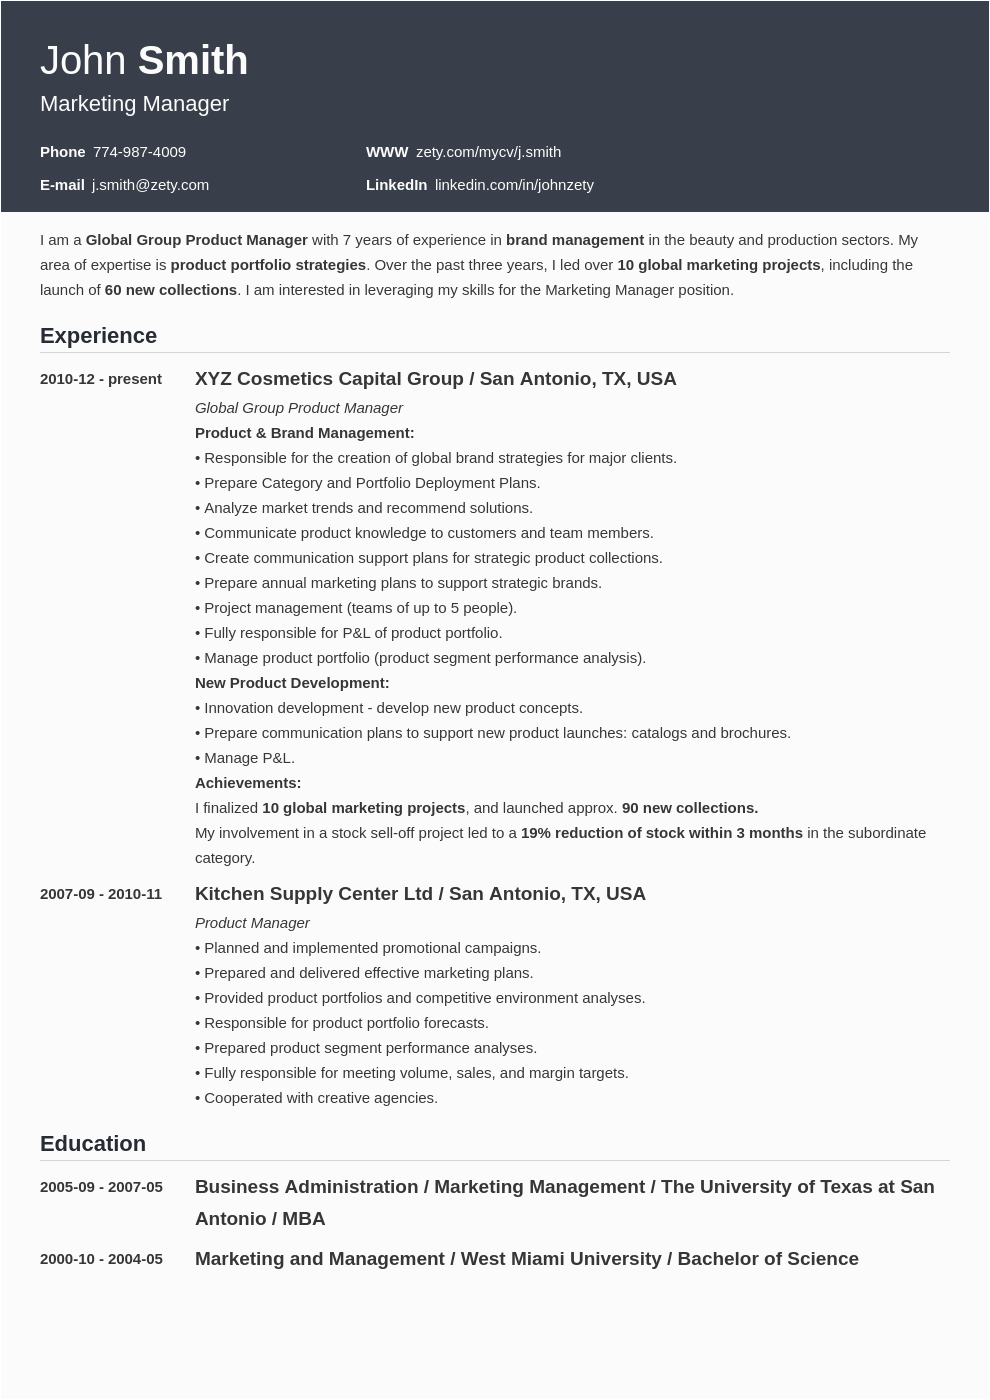 Sample Education Section Of A Resume How to List Education On A Resume Section Examples & Tips